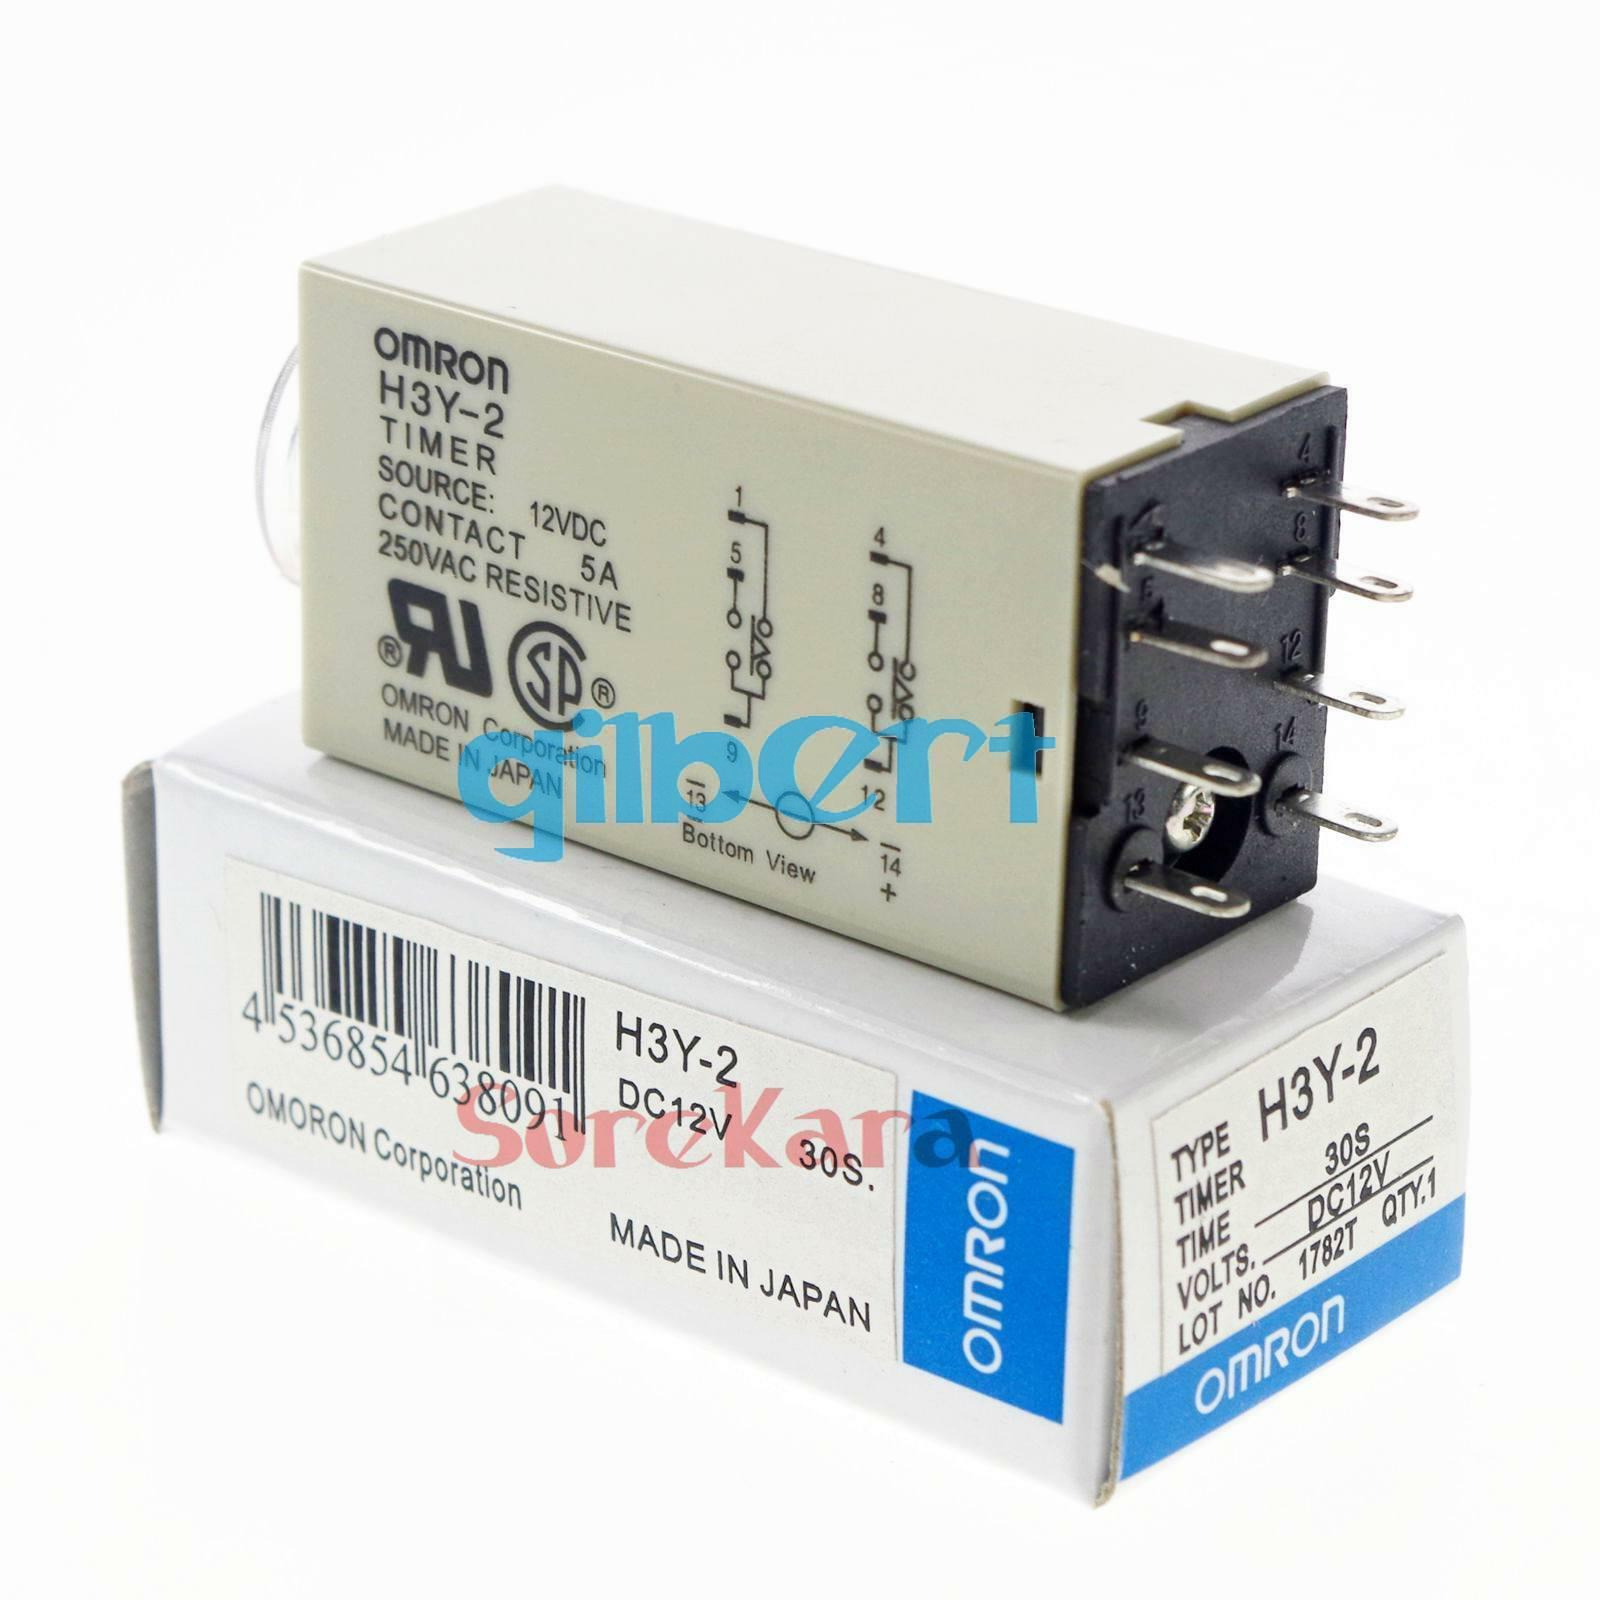 2~60S 110V H3Y-4 Power On Time Delay Relay Solid-State Timer,4PDT,14Pins&Socket 